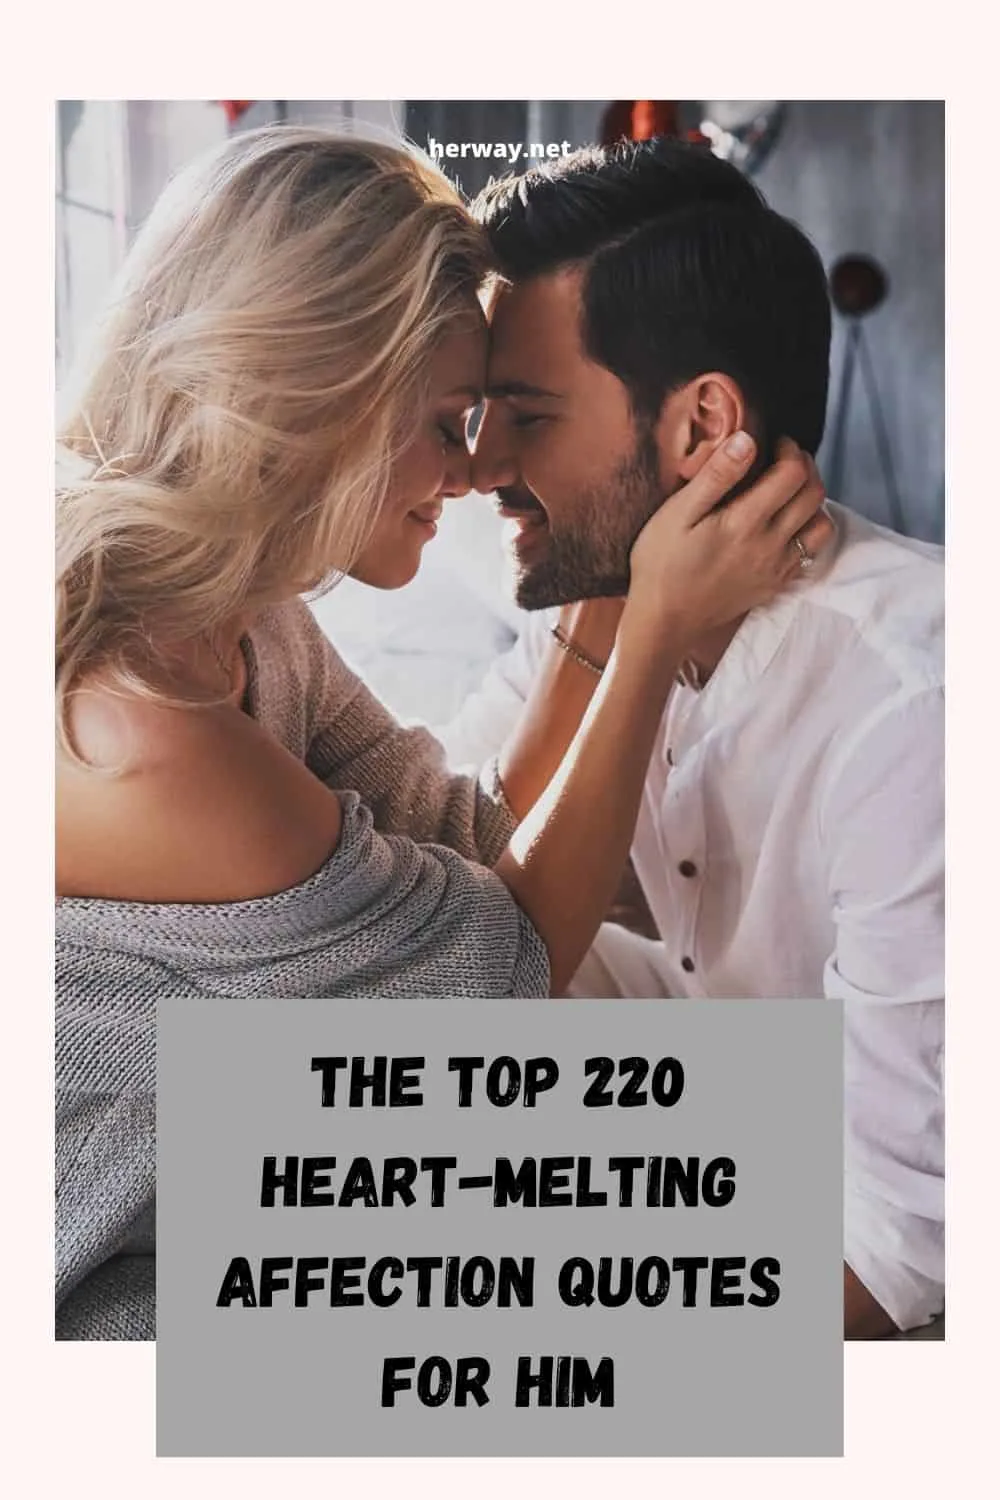 The Top 220 Heart-Melting Affection Quotes For Him